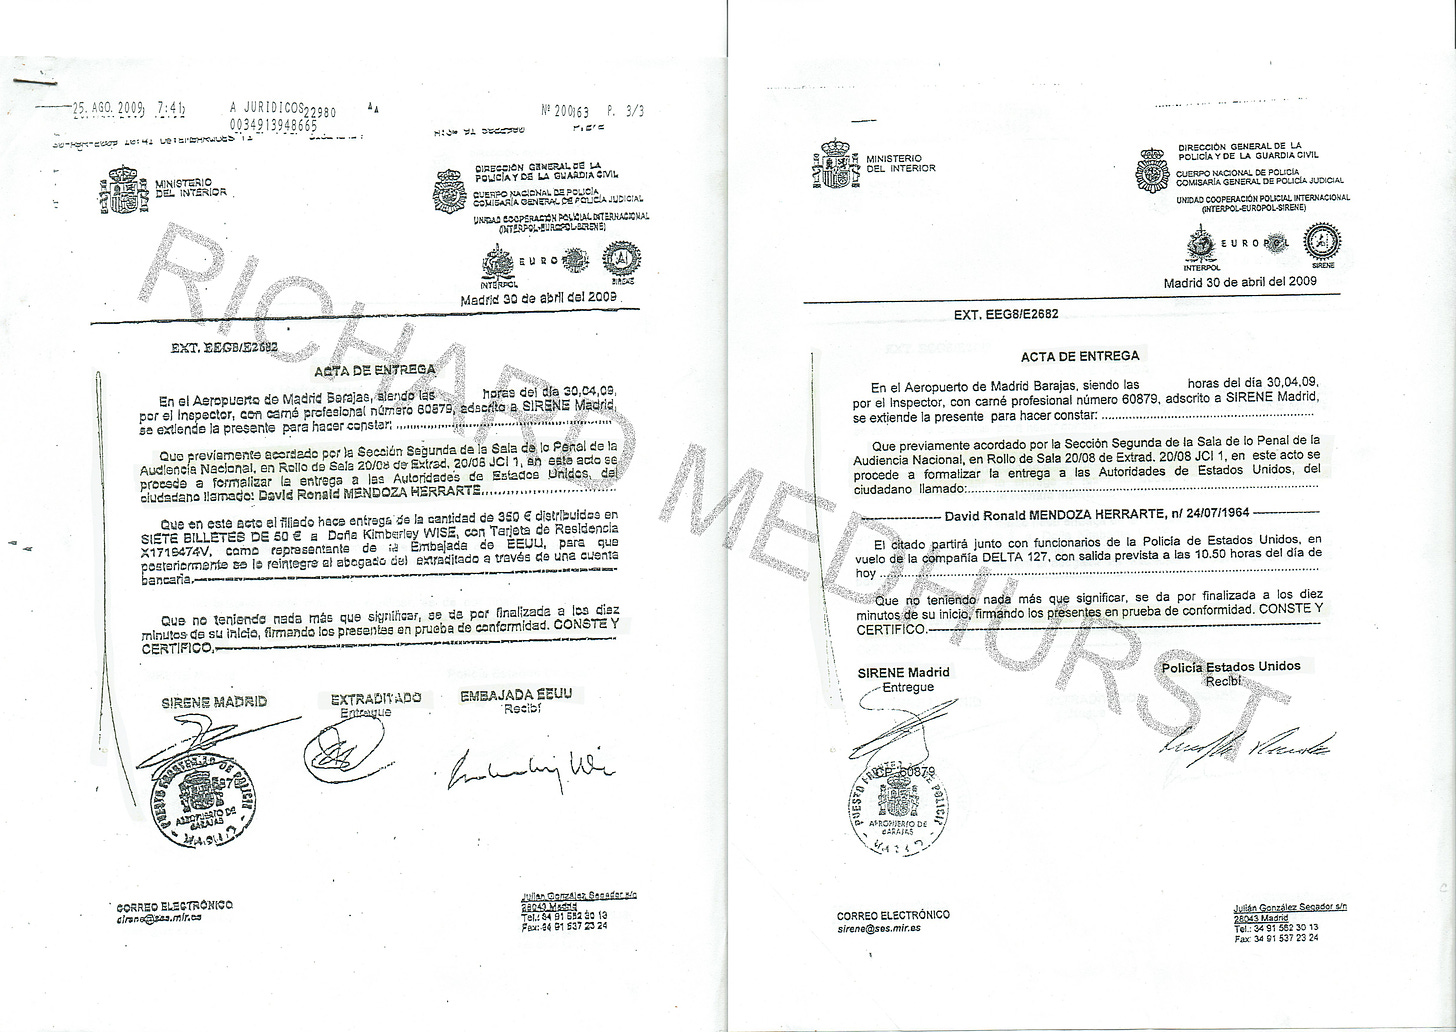 Under a FOIA request, Mendoza asked for a copy of the Acta de Entrega he signed (left). The US denied his request, saying it was classified and he was not privy to diplomatic communications.